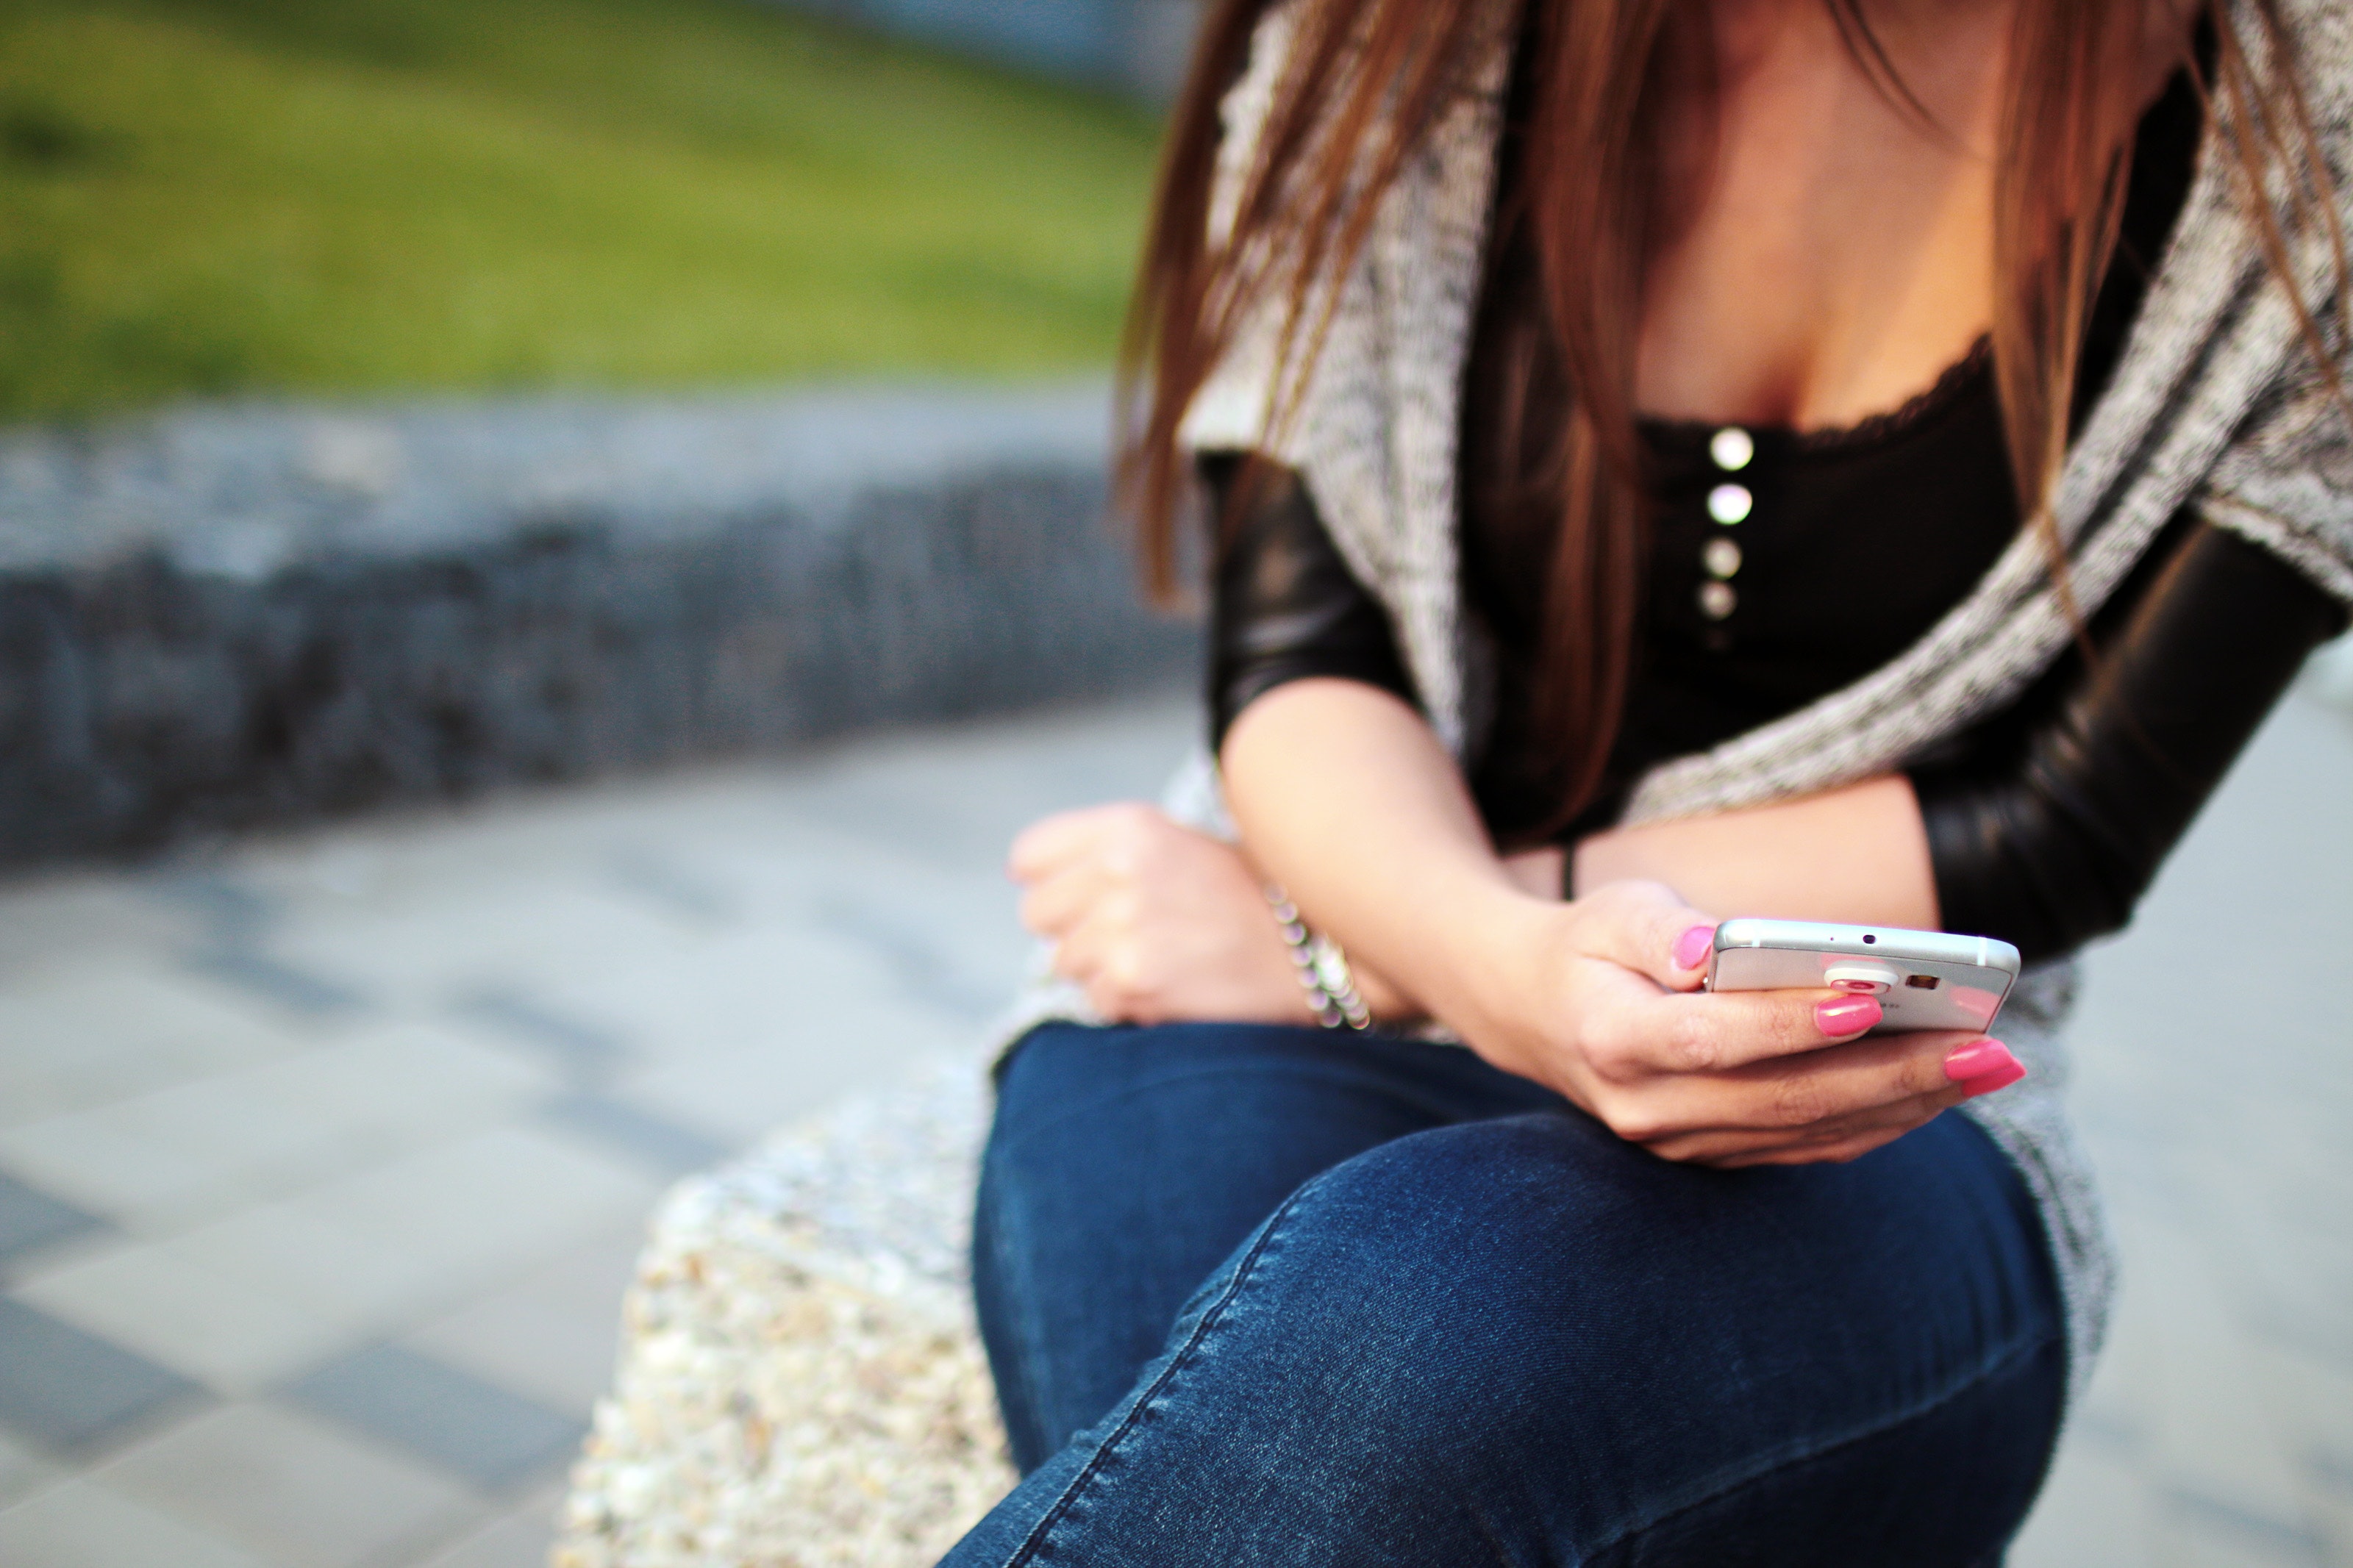 "Satisfying too" - Young woman examines her cellphone, seated outside